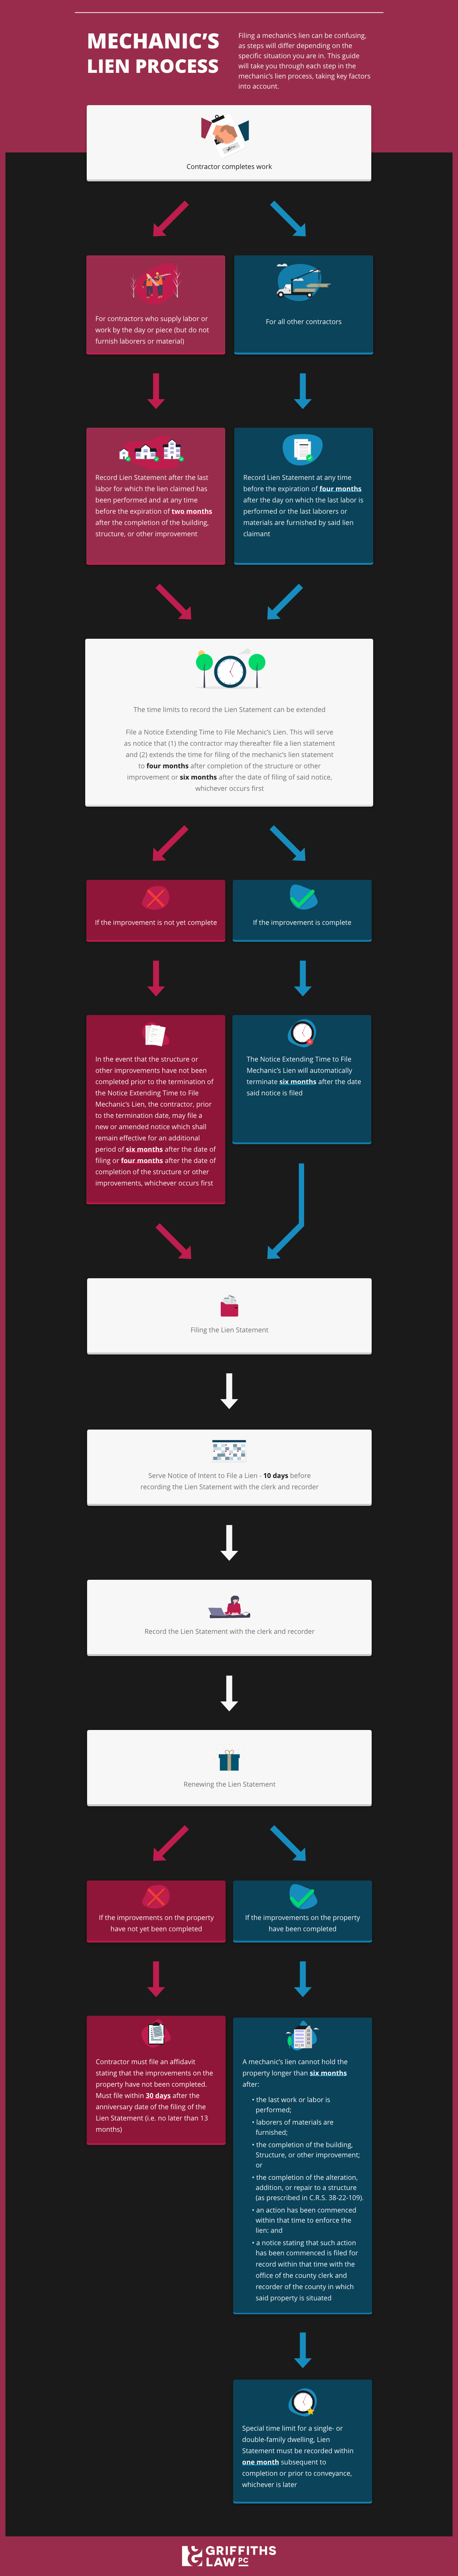 Infographic visual guide to filing a mechanic's lien in Colorado